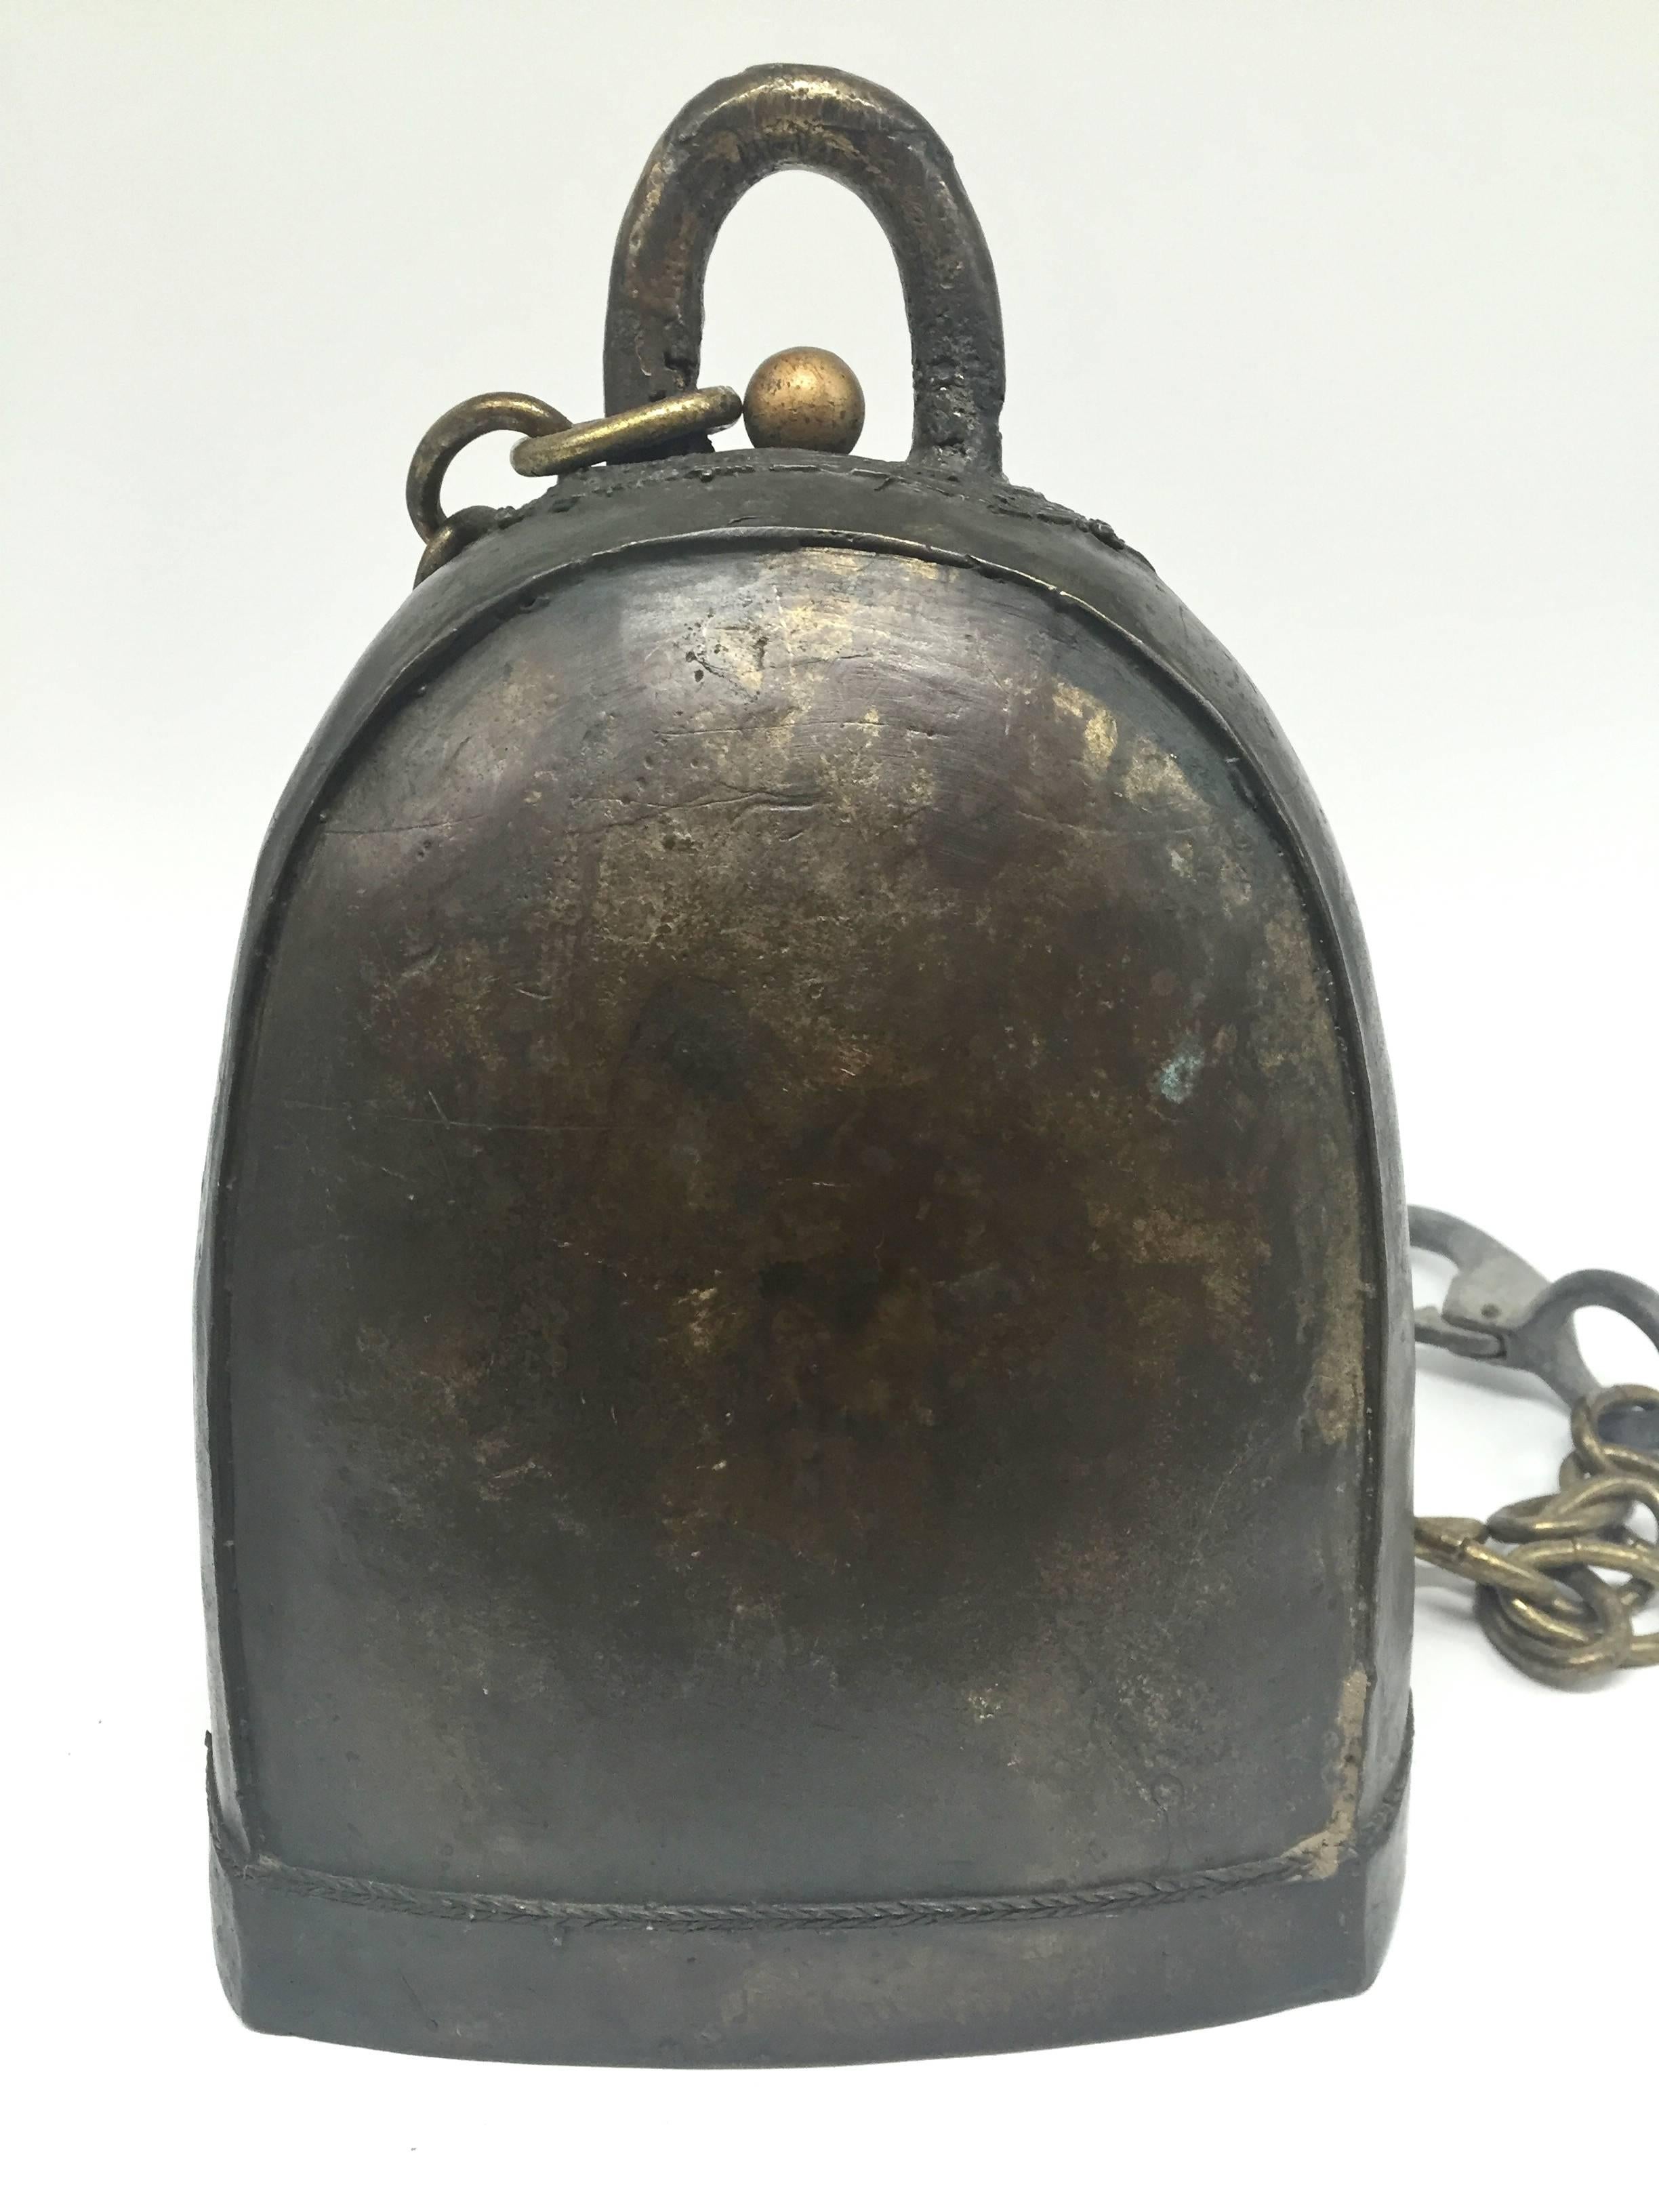 This is a substantial yet beautifully crafted antique temple bell. Solid bronze and wonderful design creates a lasting, powerful sound that is pleasant and thought provoking. Bell is an important part of Tibetan daily life. It acts as an